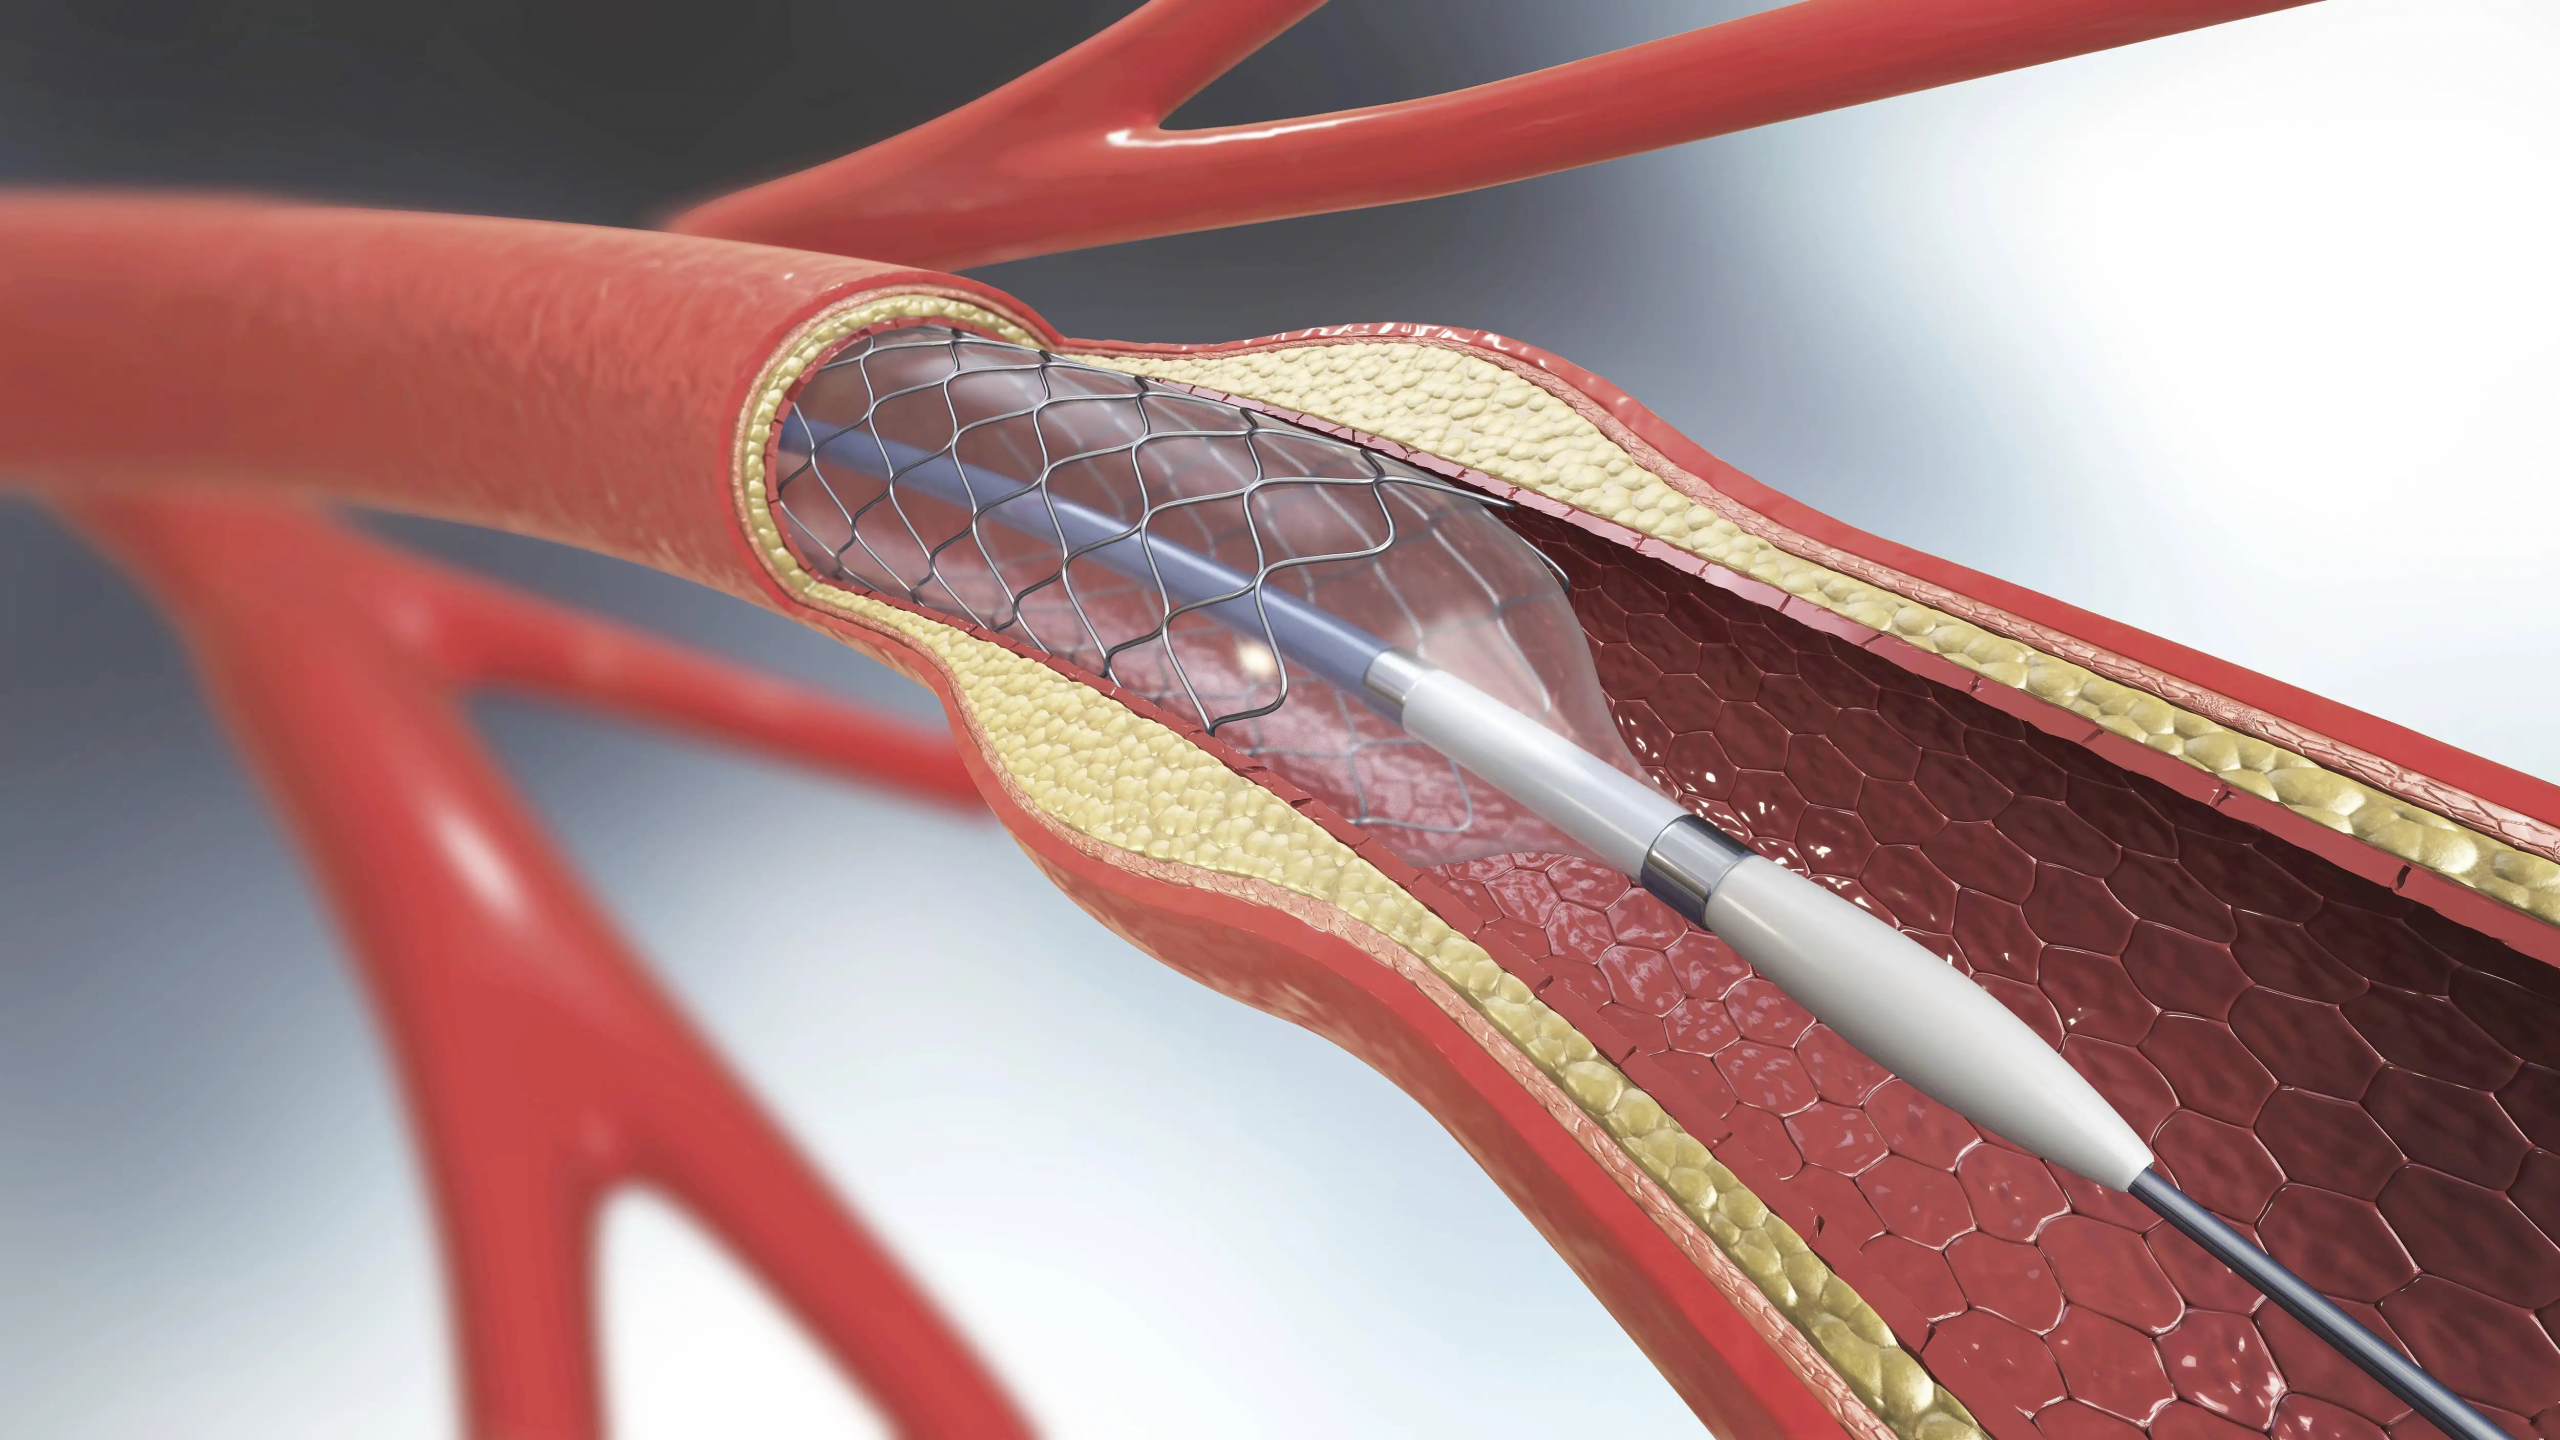 Cardiac Stent Market with Huge Potential — China